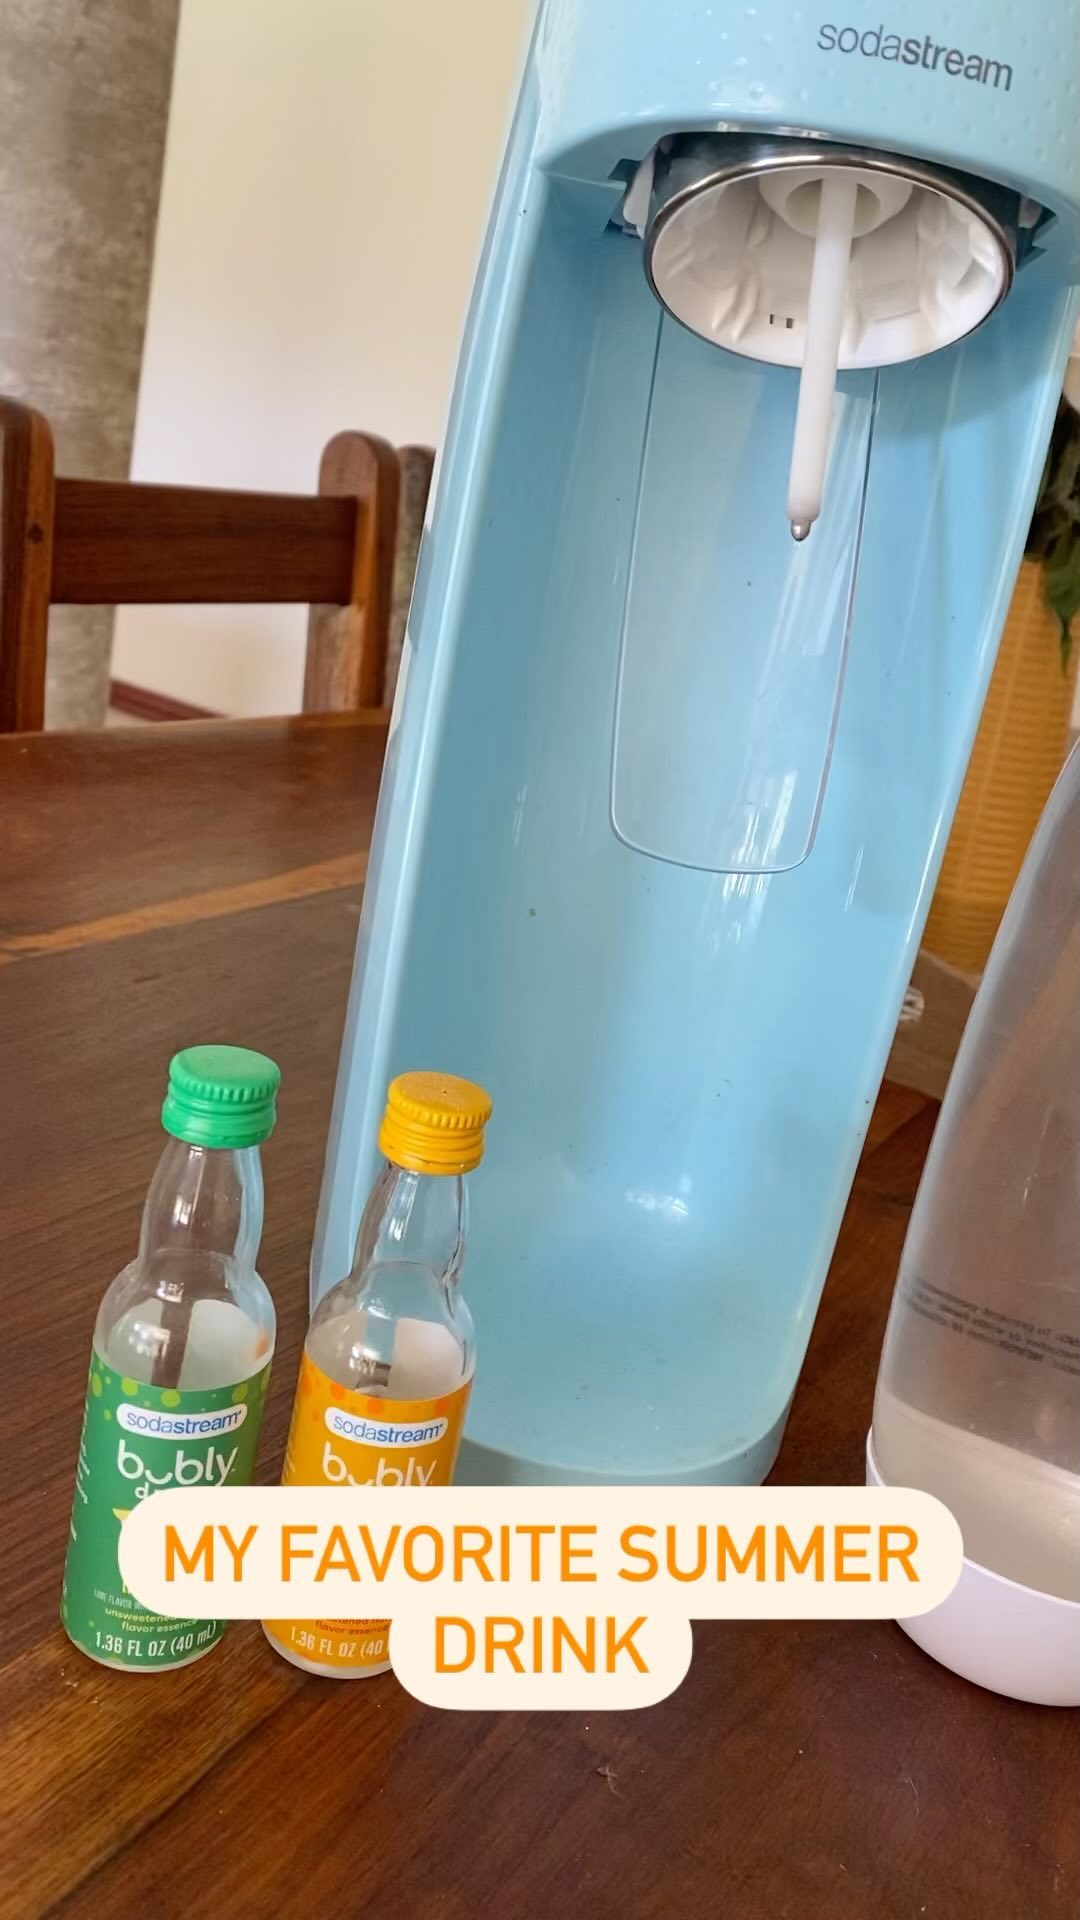 We love our Soda Streams . . . A way we can make flavored sparkling water at home to keep us hydrated (calorie free!) all summer long! ☀️ 🏝 

☀️SPECIAL DEAL on Sodastream machine ☀️ in stories or copy this link https://amzn.to/3vcihPW

#sixcleversisters #bubly #sodastream